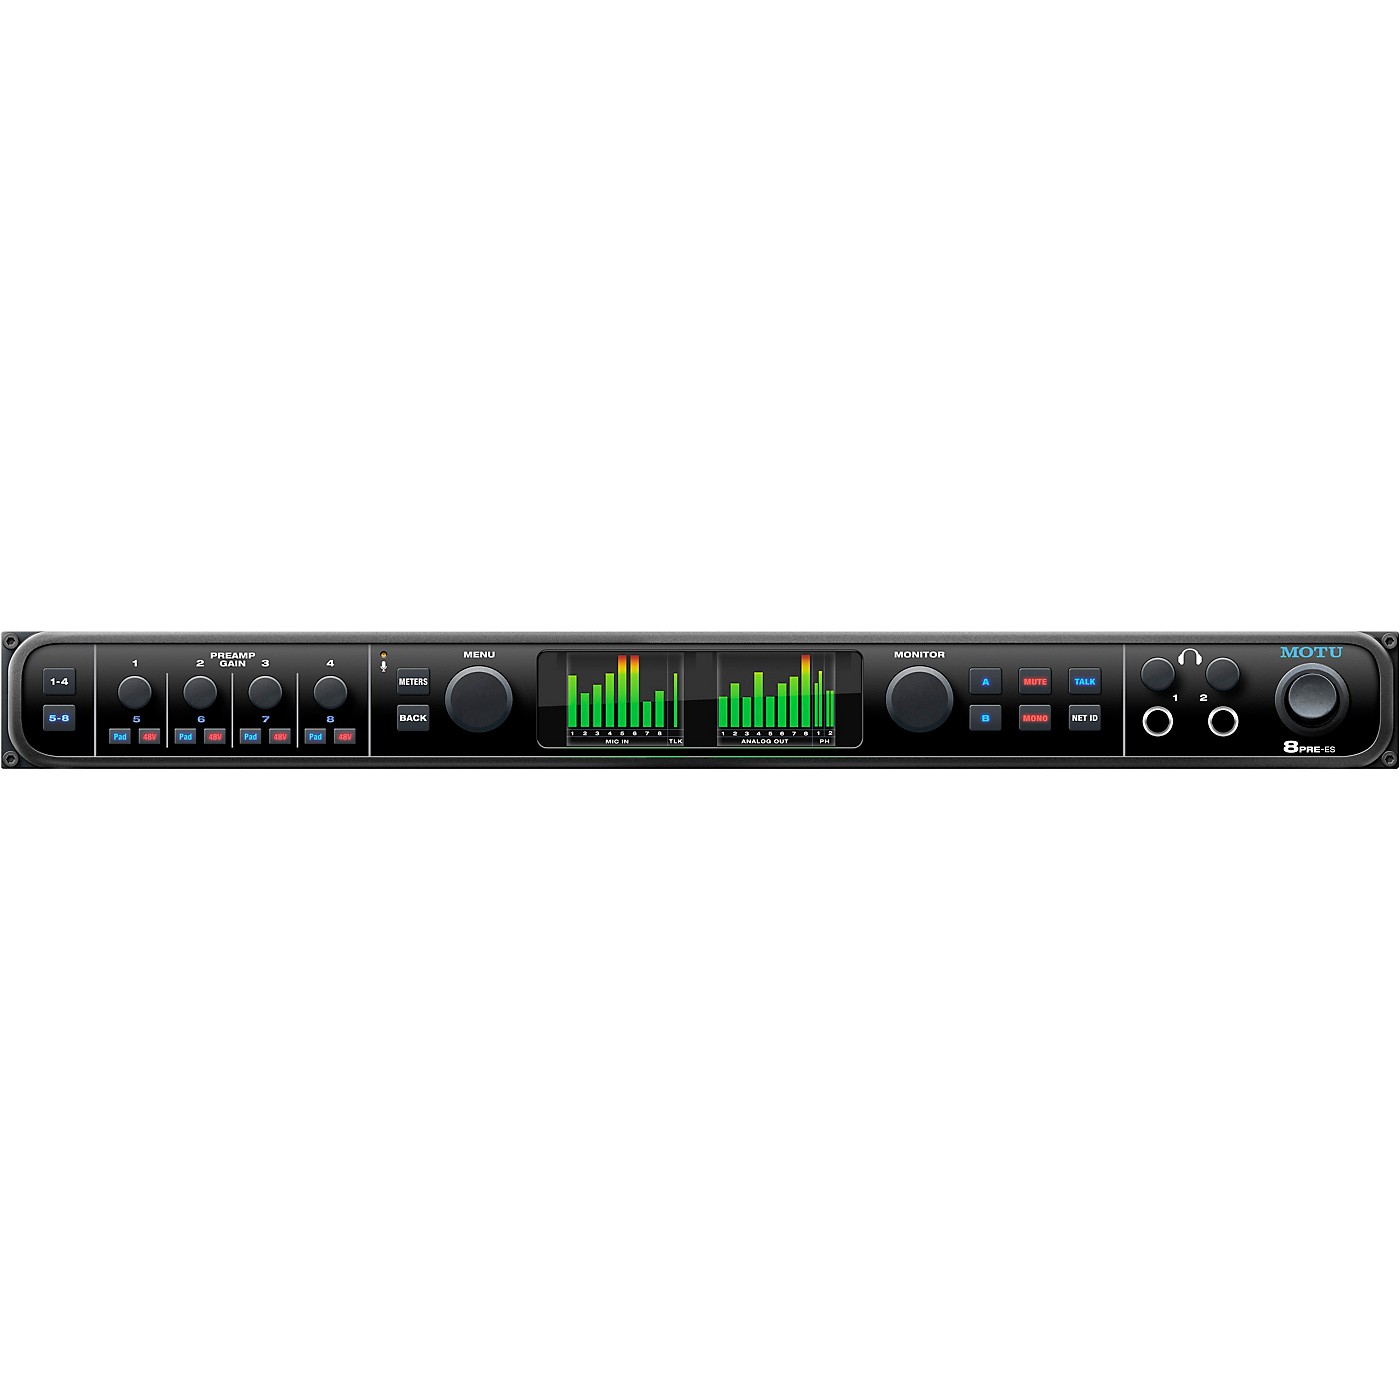 MOTU 8pre-es 24 x 28 Thunderbolt/USB Audio Interface with 8 Mic Pres, DSP and Networking thumbnail